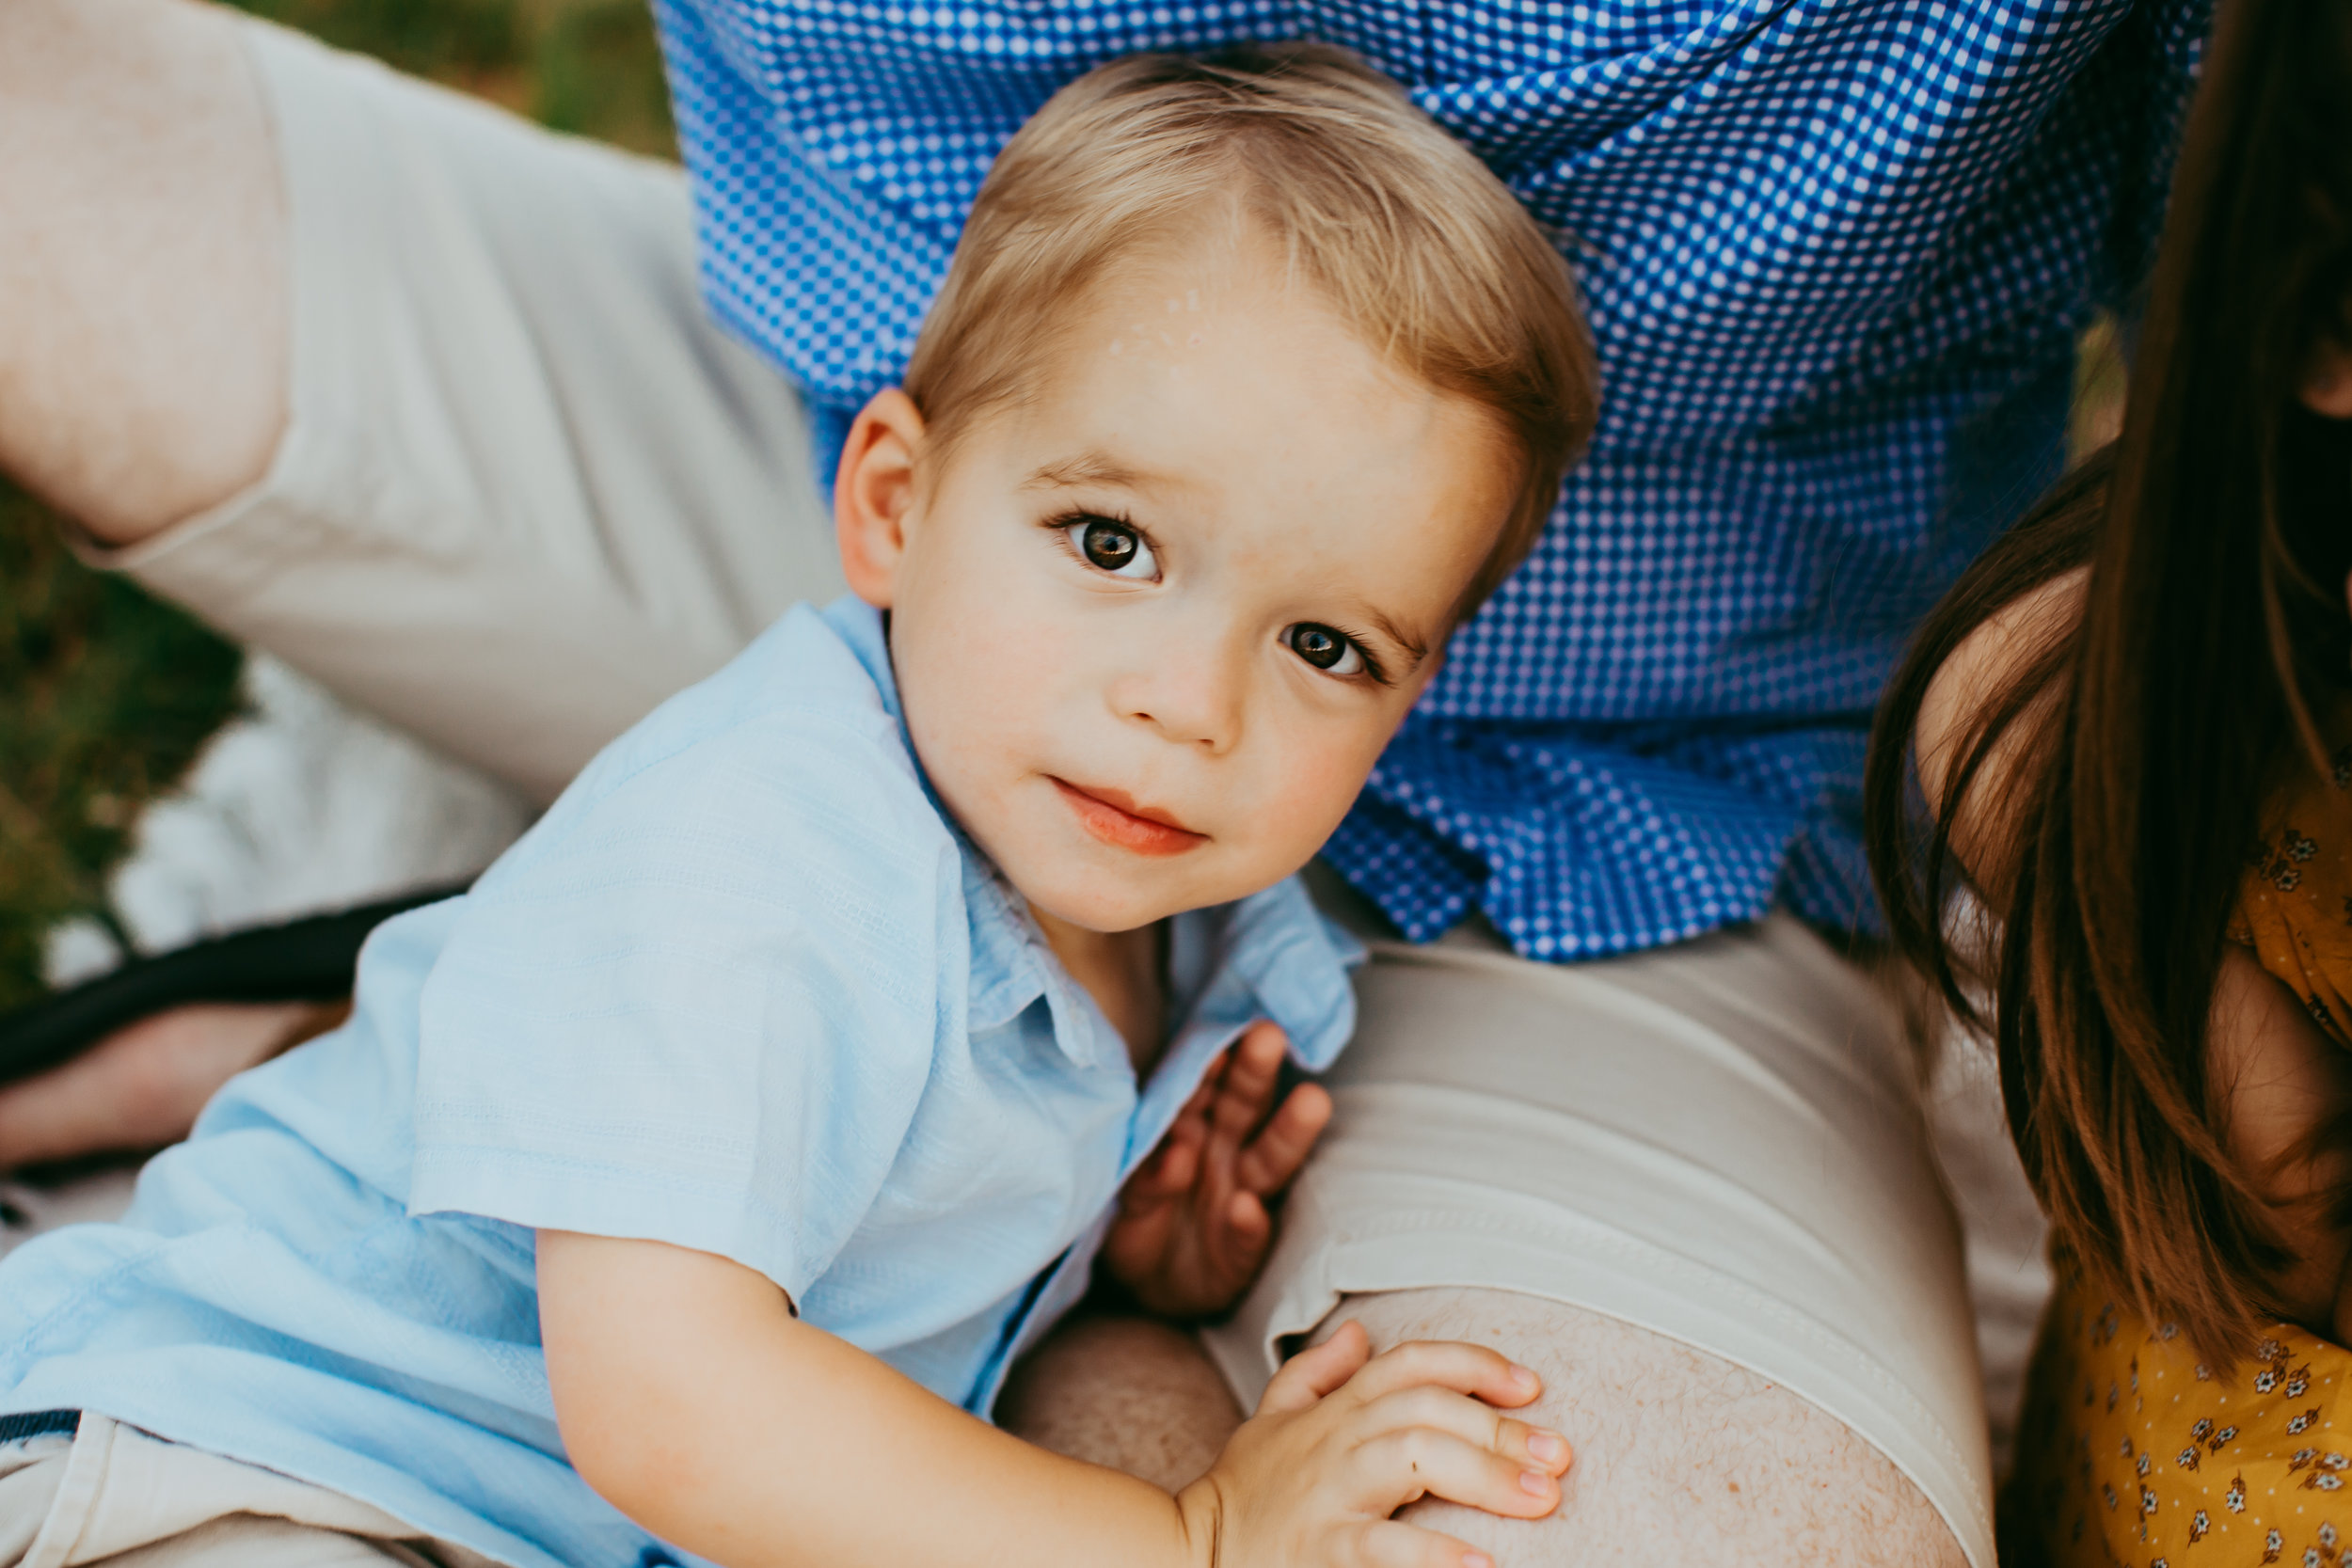  Close up of little one sitting on dads lap looking up at the camera #tealawardphotography #texasfamilyphotographer #amarillophotographer #amarillofamilyphotographer #lifestylephotography #emotionalphotography #familyphotosoot #family #lovingsiblings #purejoy #familyphotos #familyphotographer #greatoutdoors #naturalfamilyinteraction 